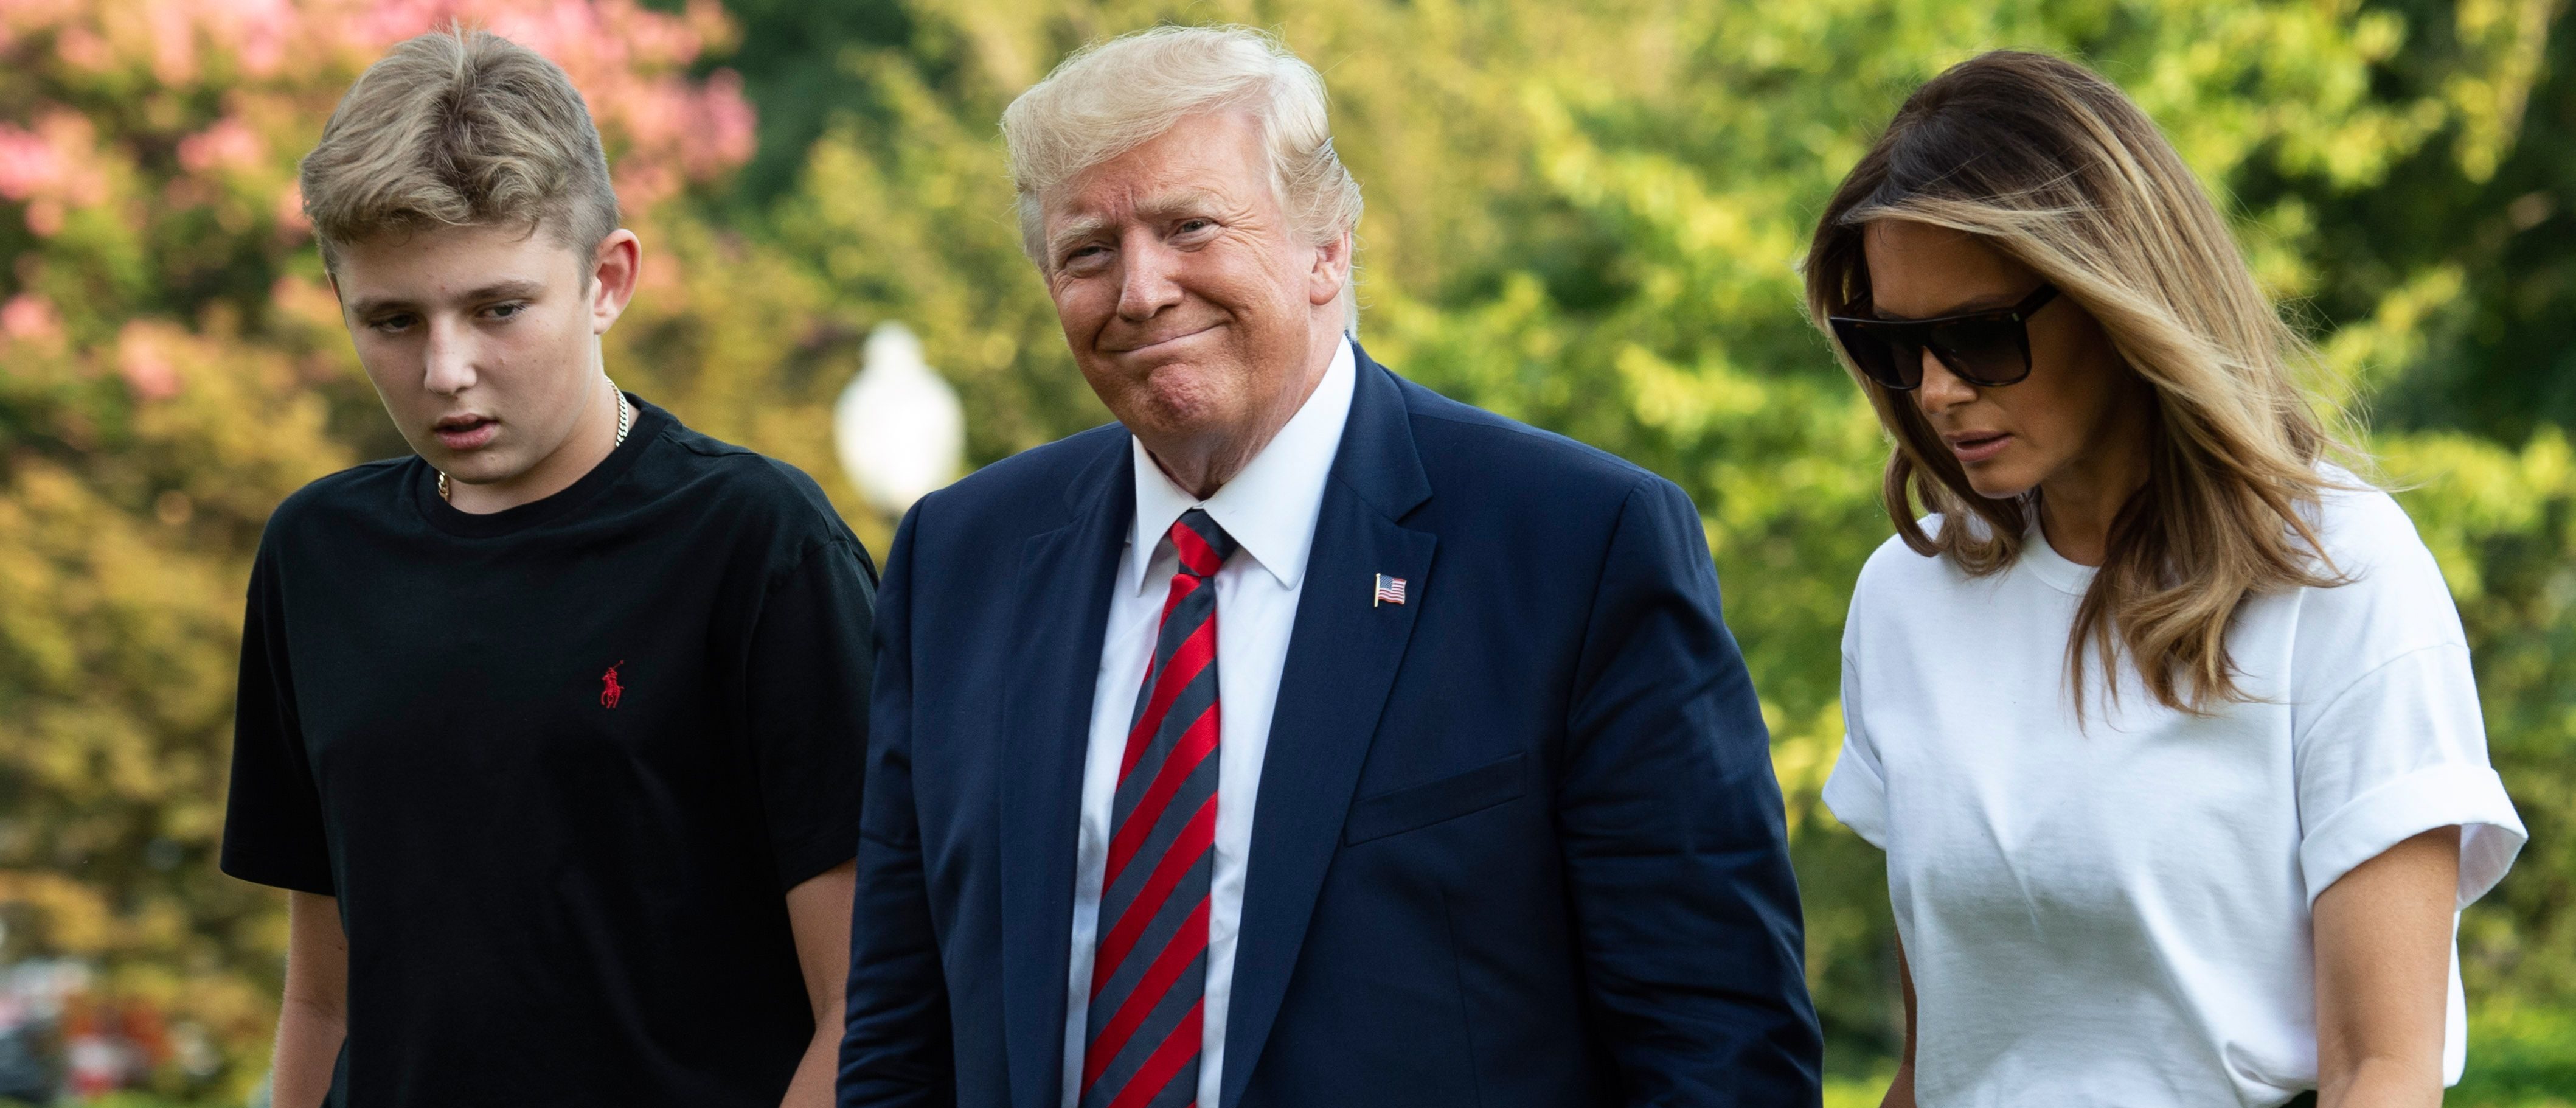 US President Donald Trump (C), First Lady Melania Trump (R) and their son Barron Trump (L) return to the White House after two weeks spent at Trump's golf club in New Jersey on August 18, 2019 in Washington, DC. (Photo by Eric BARADAT / AFP via Getty Images)